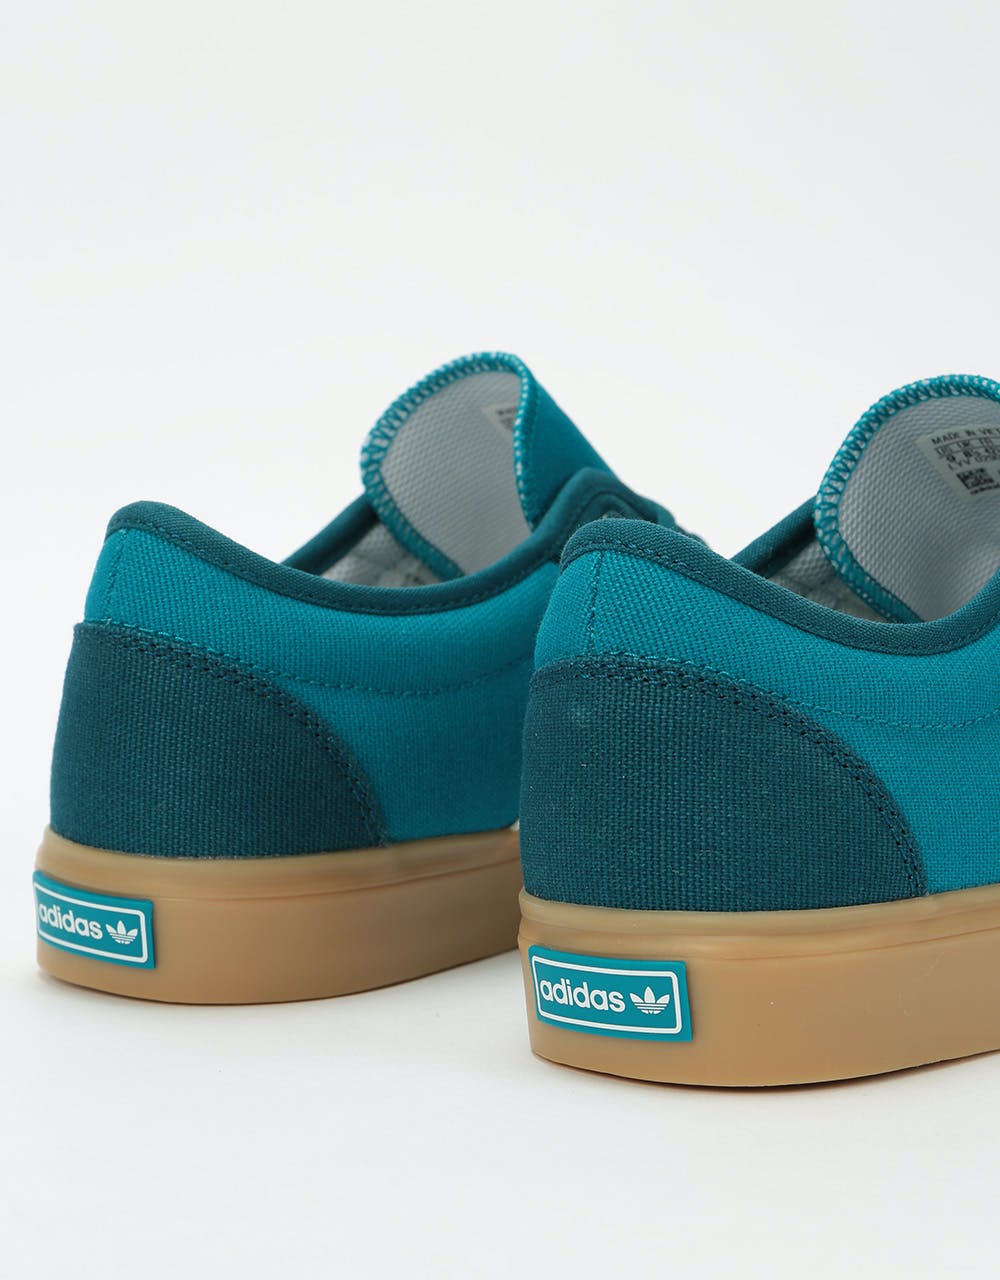 Adidas Adi-Ease Skate Shoes - Tech Mineral/Cloud White/Active Teal